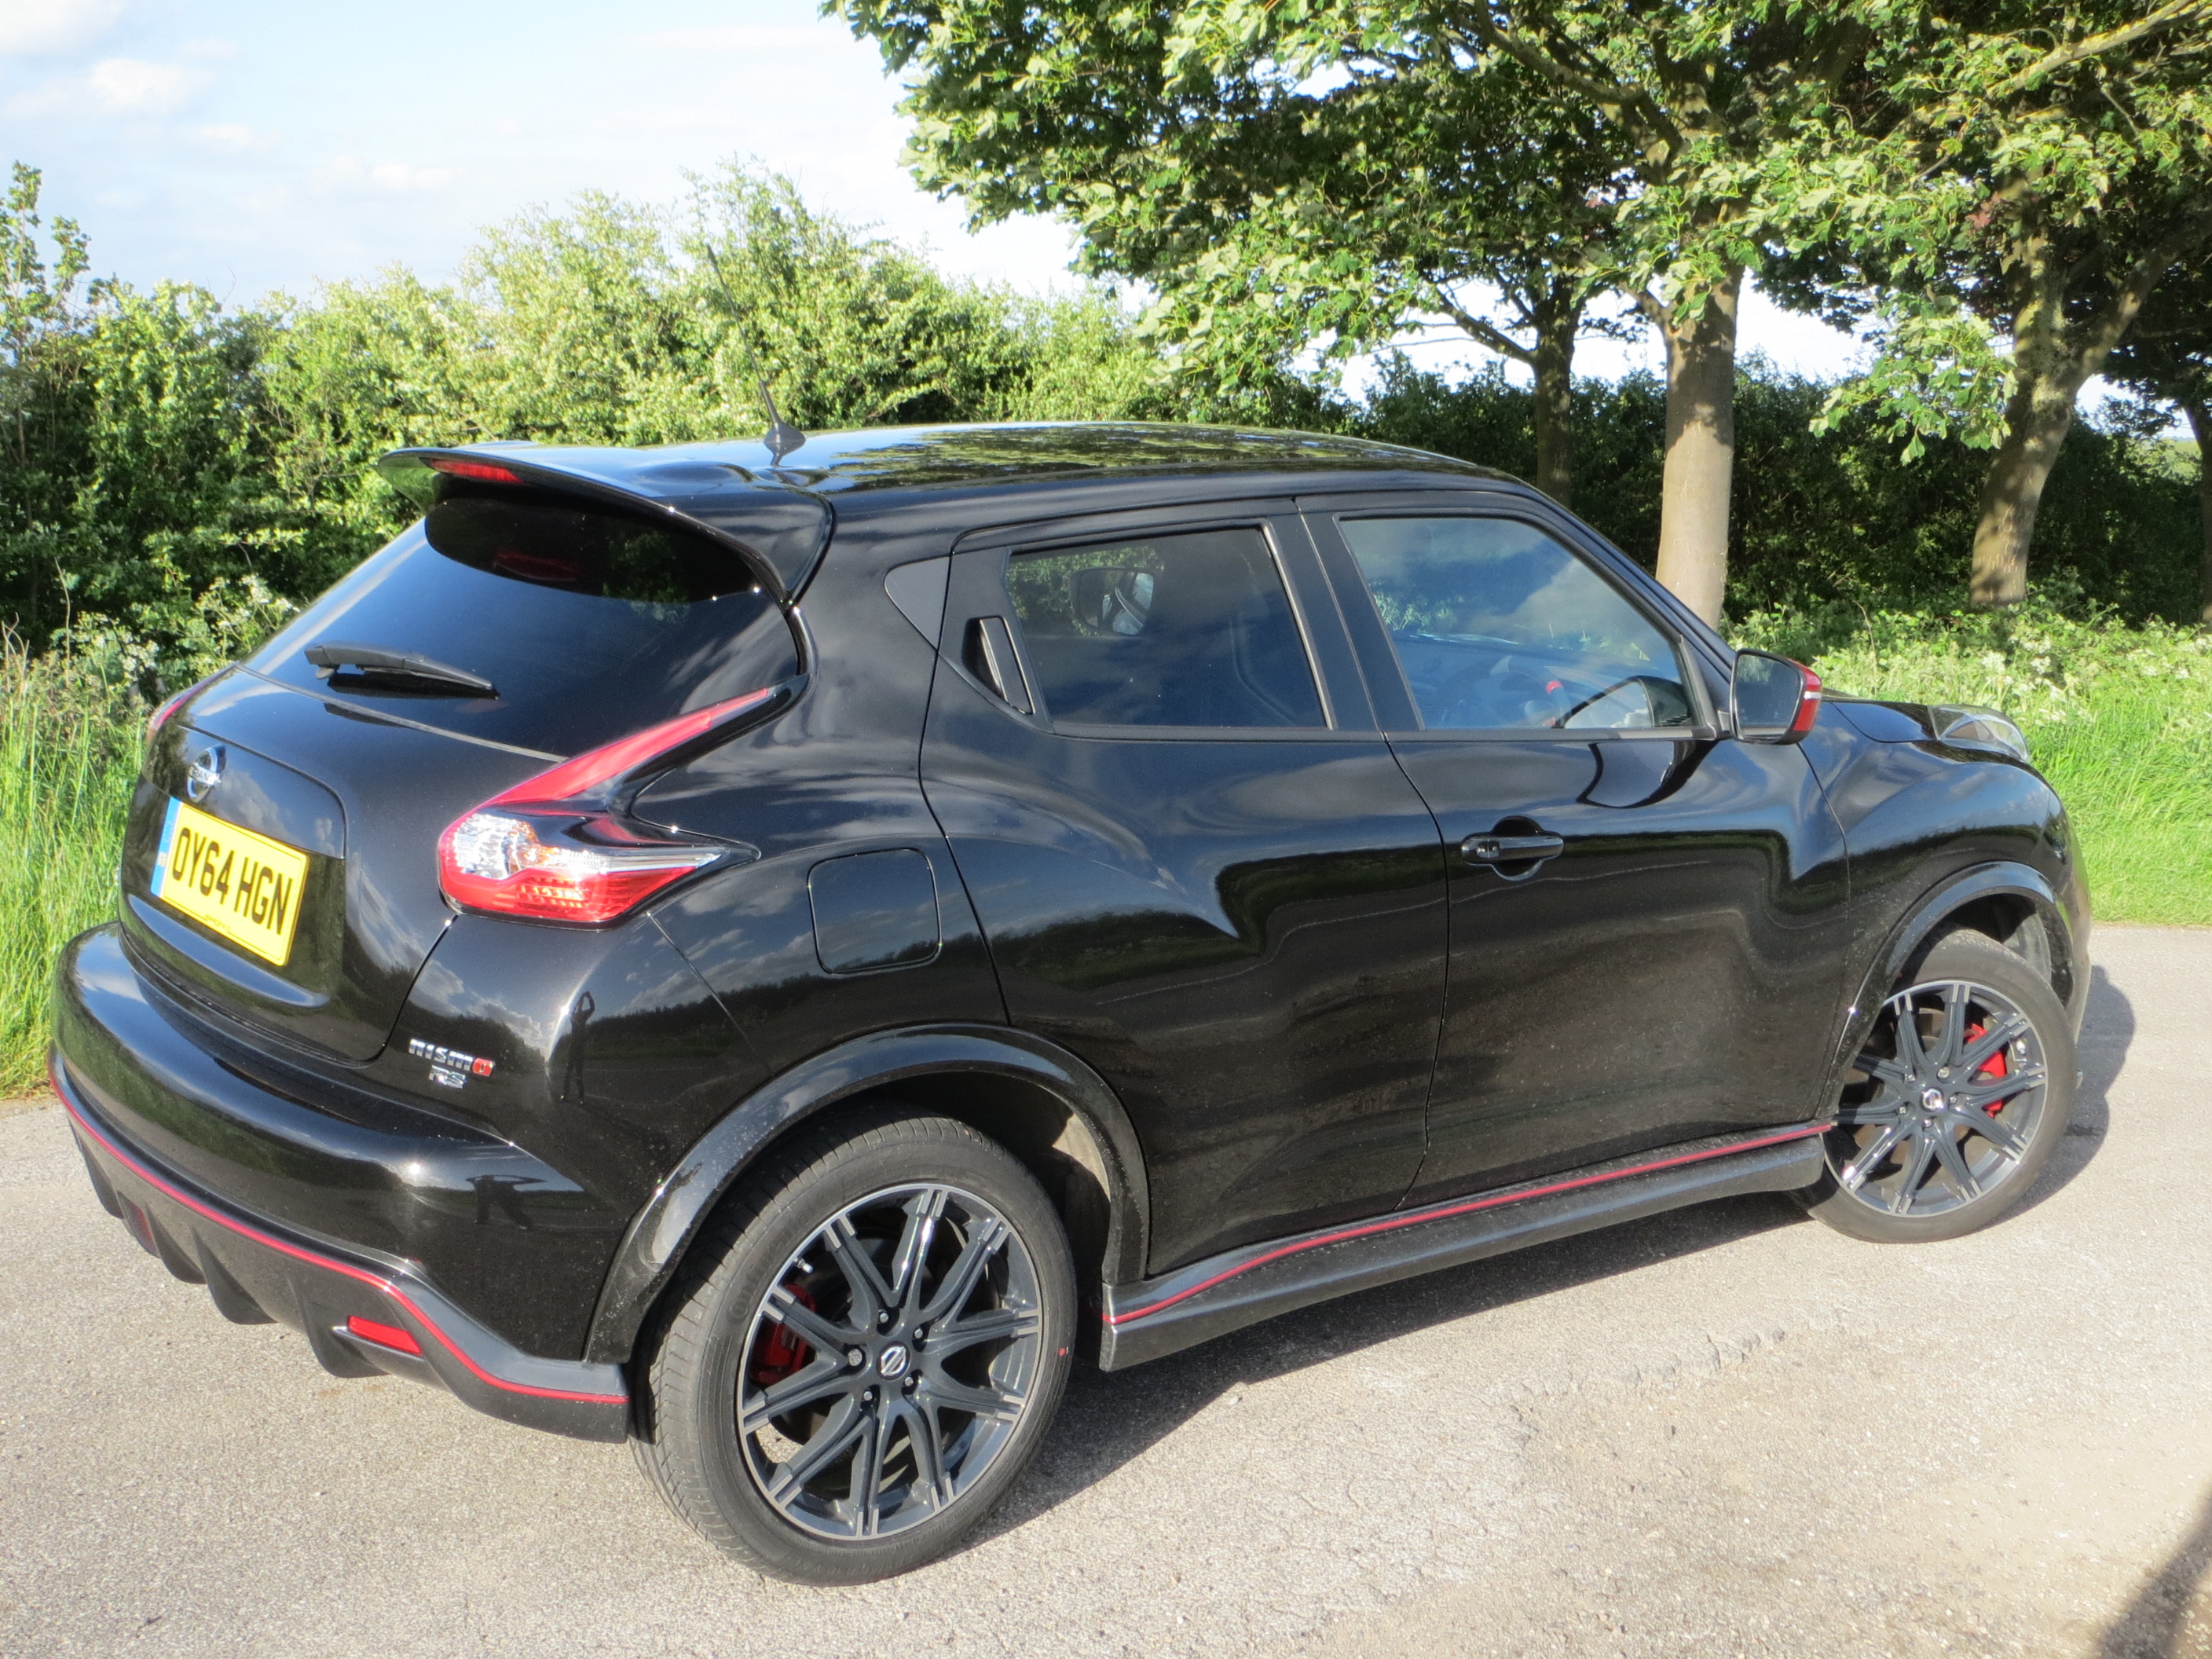 Nissan juke road and track reviews #1